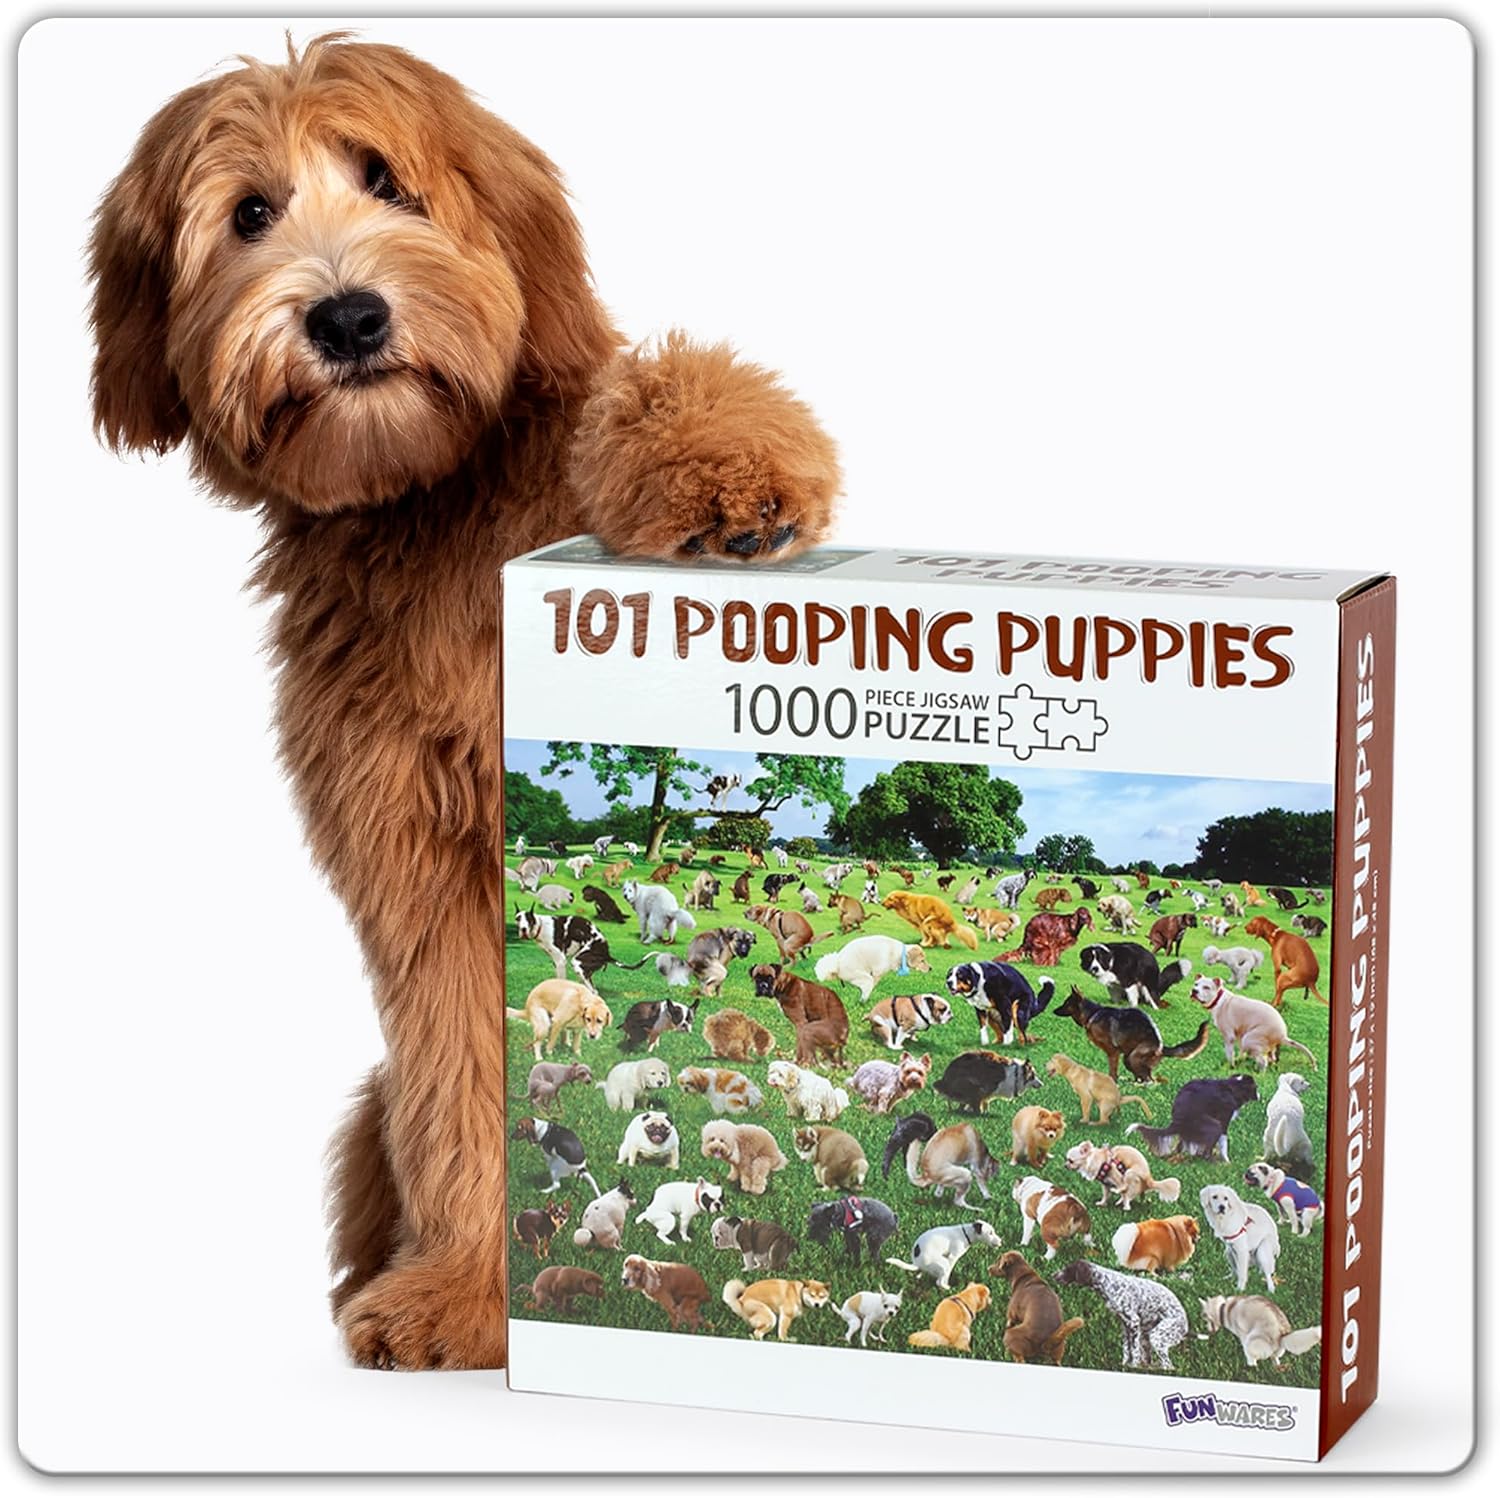 https://iheartdogs.com/wp-content/uploads/2023/10/101_Pooping_Puppies_Puzzle.jpg